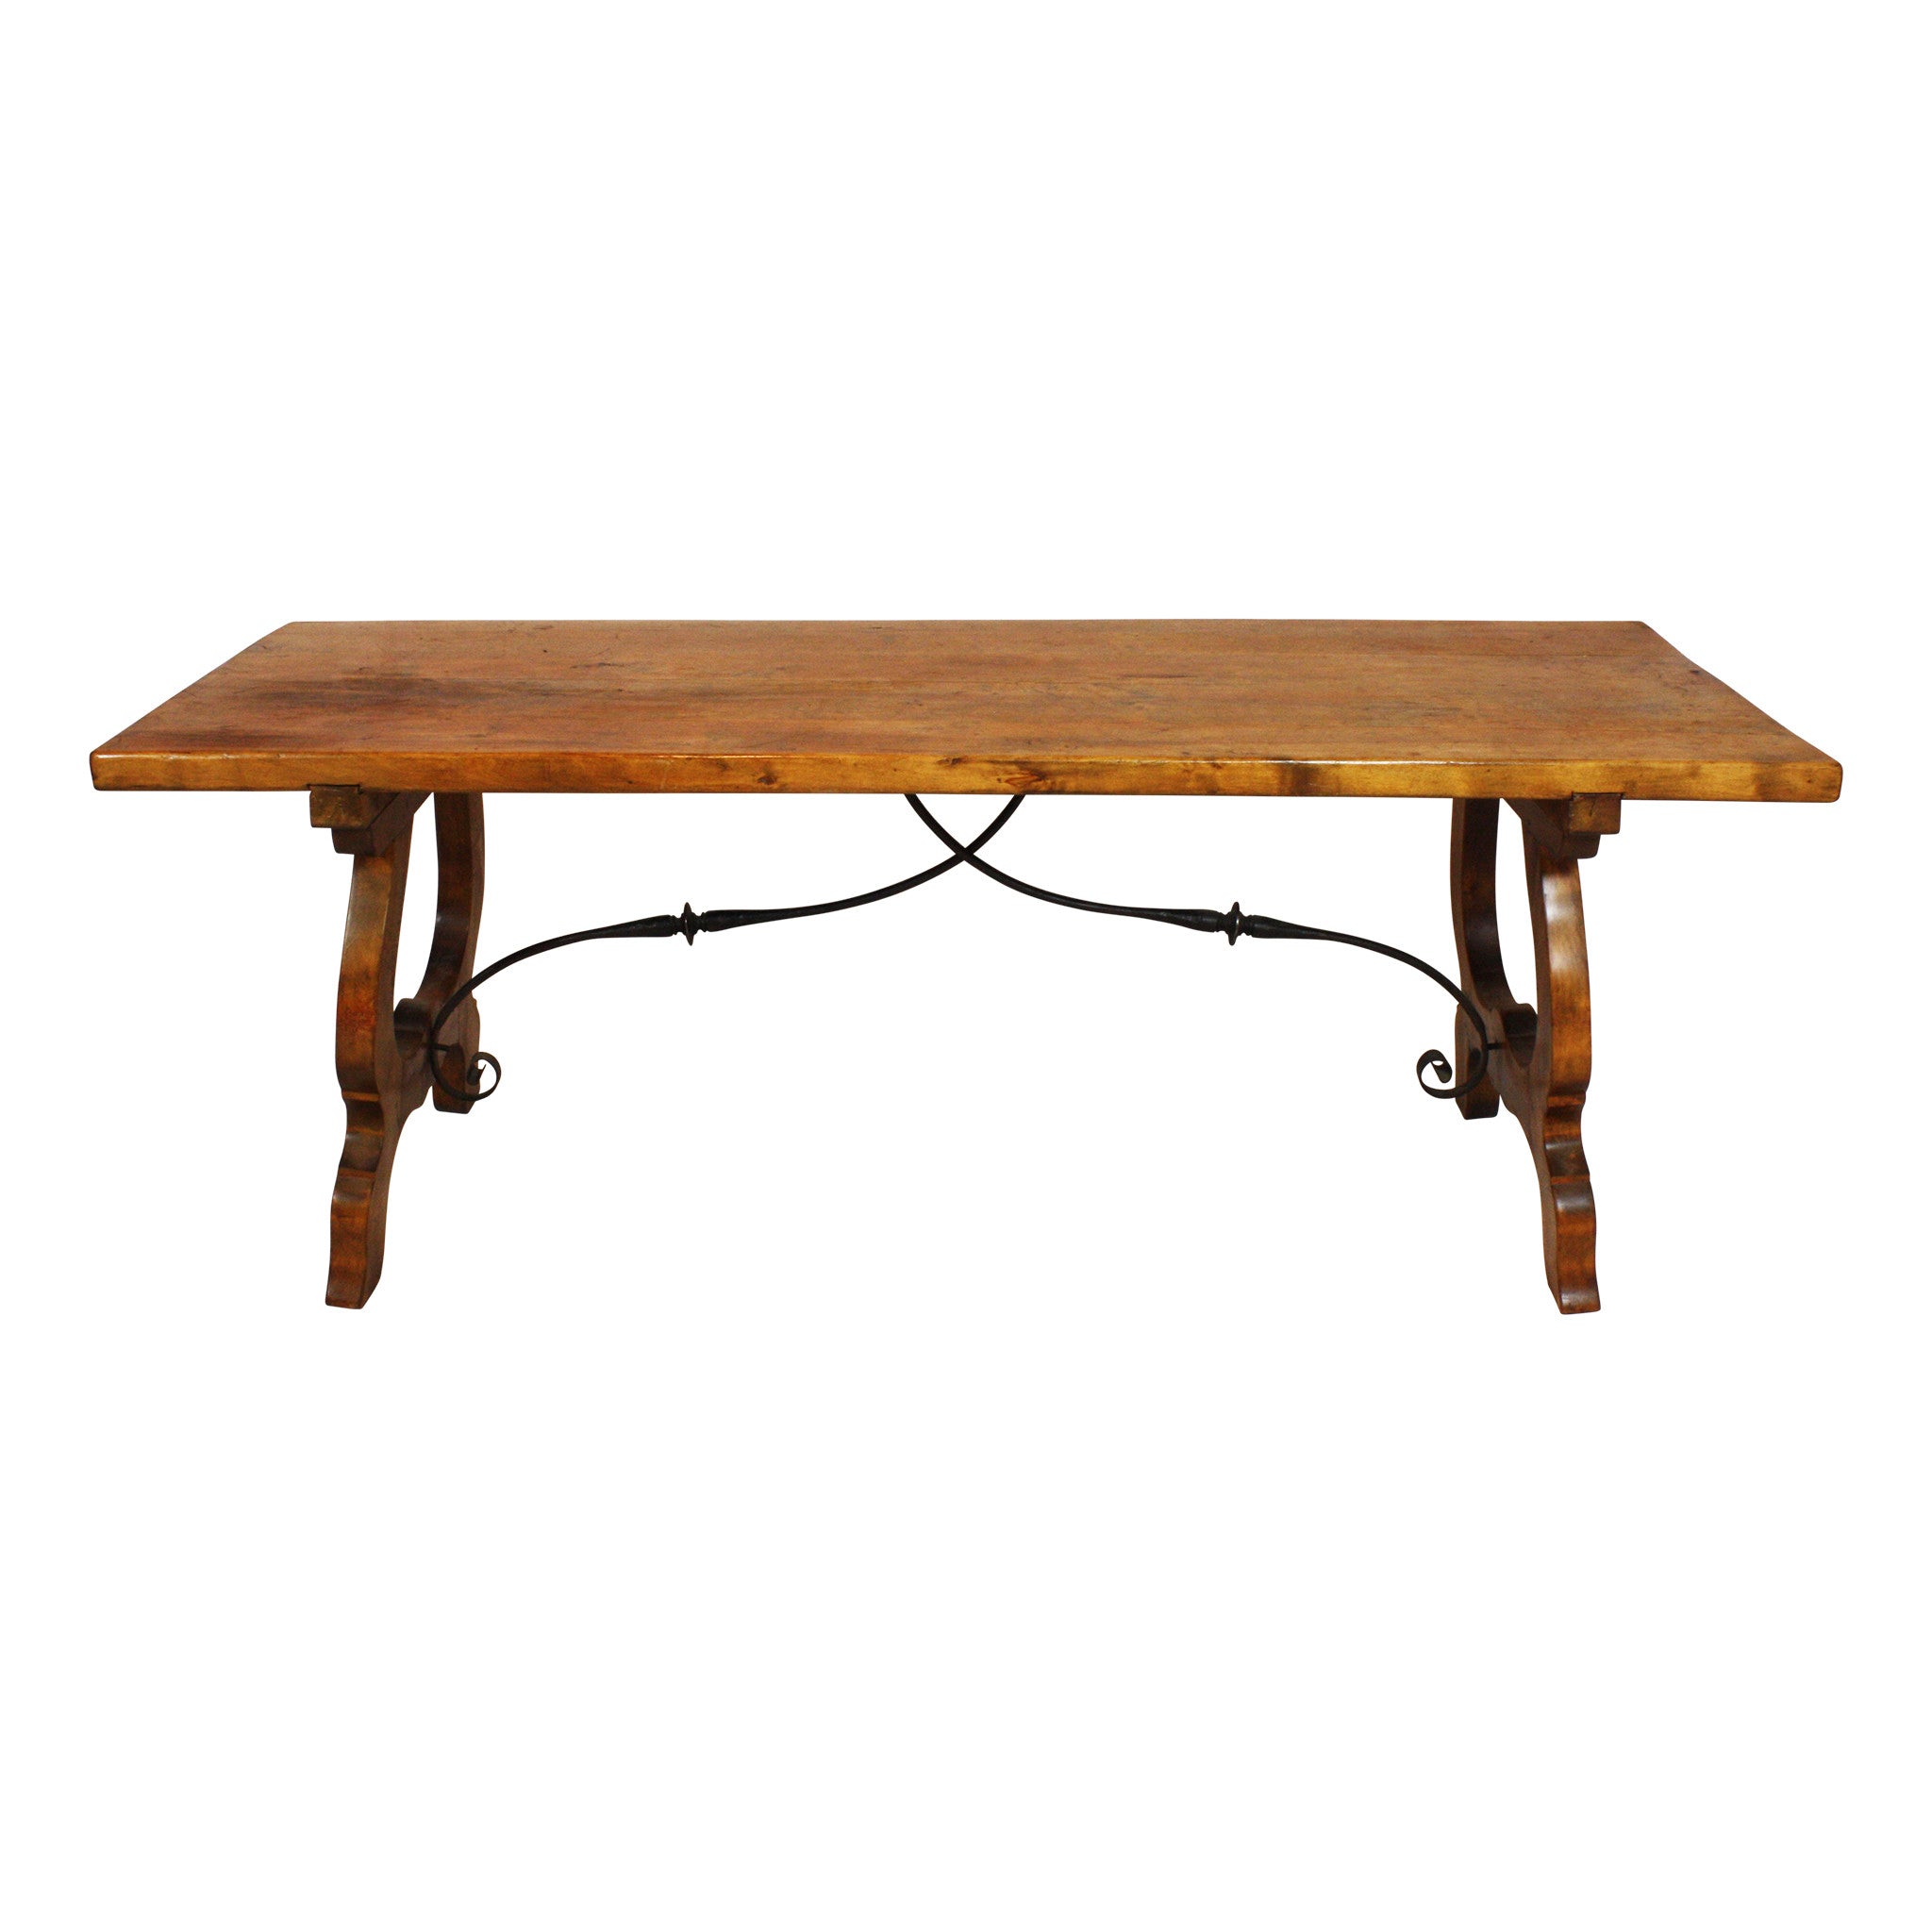 ski-country-antiques - Spanish Oak Table with Cast Iron Scroll Work